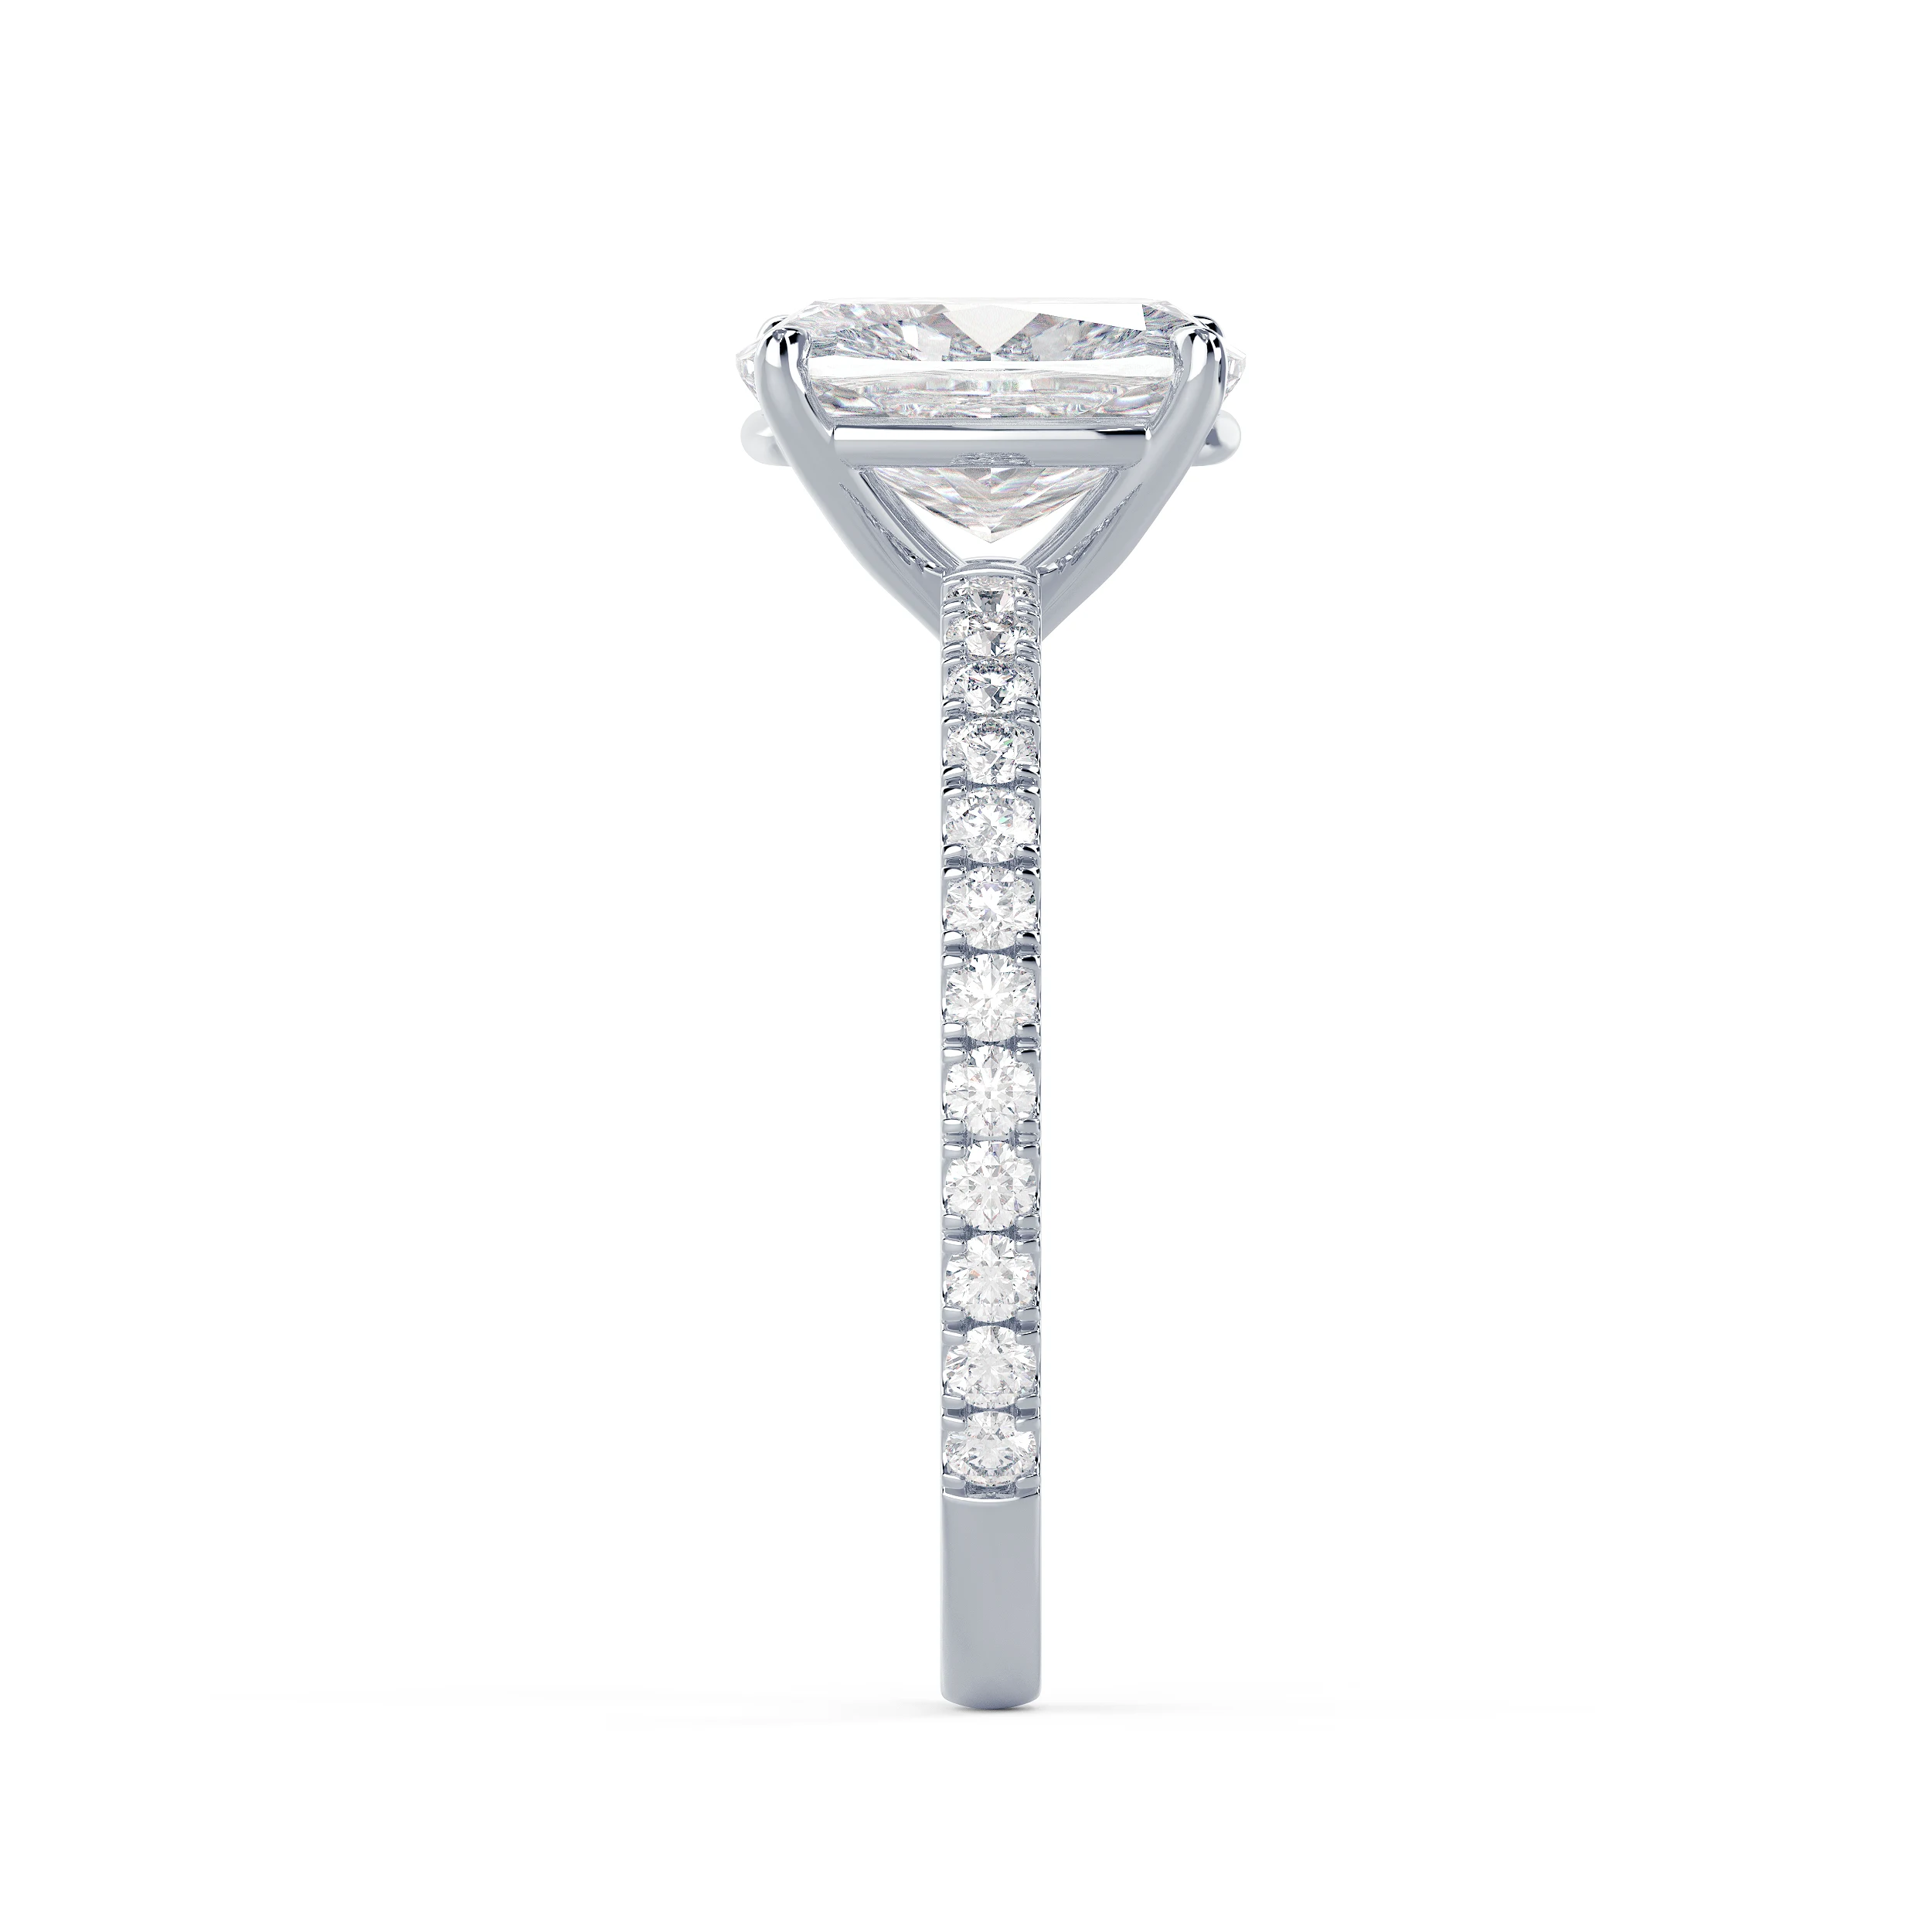 White Gold Cushion Petite Four Prong Pavé Setting featuring Exceptional Quality Diamonds (Side View)